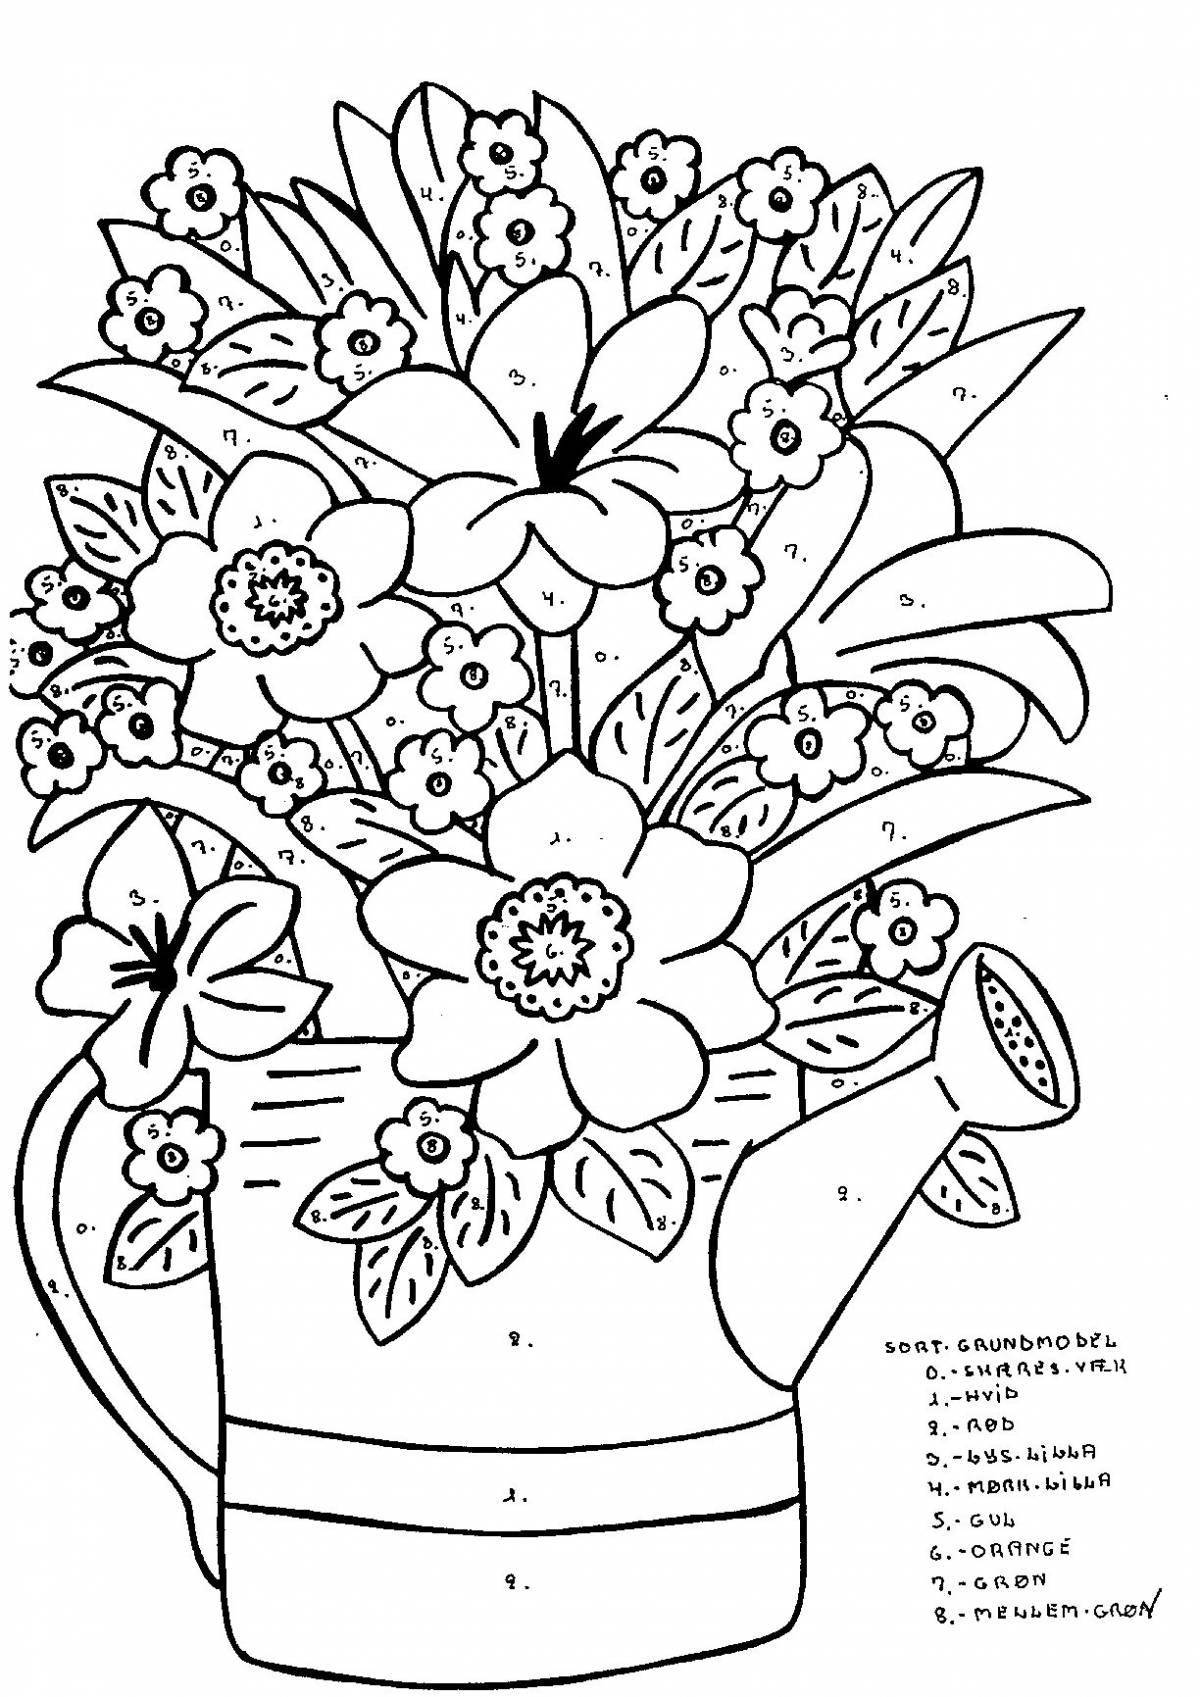 Coloring bright large flowers in a vase